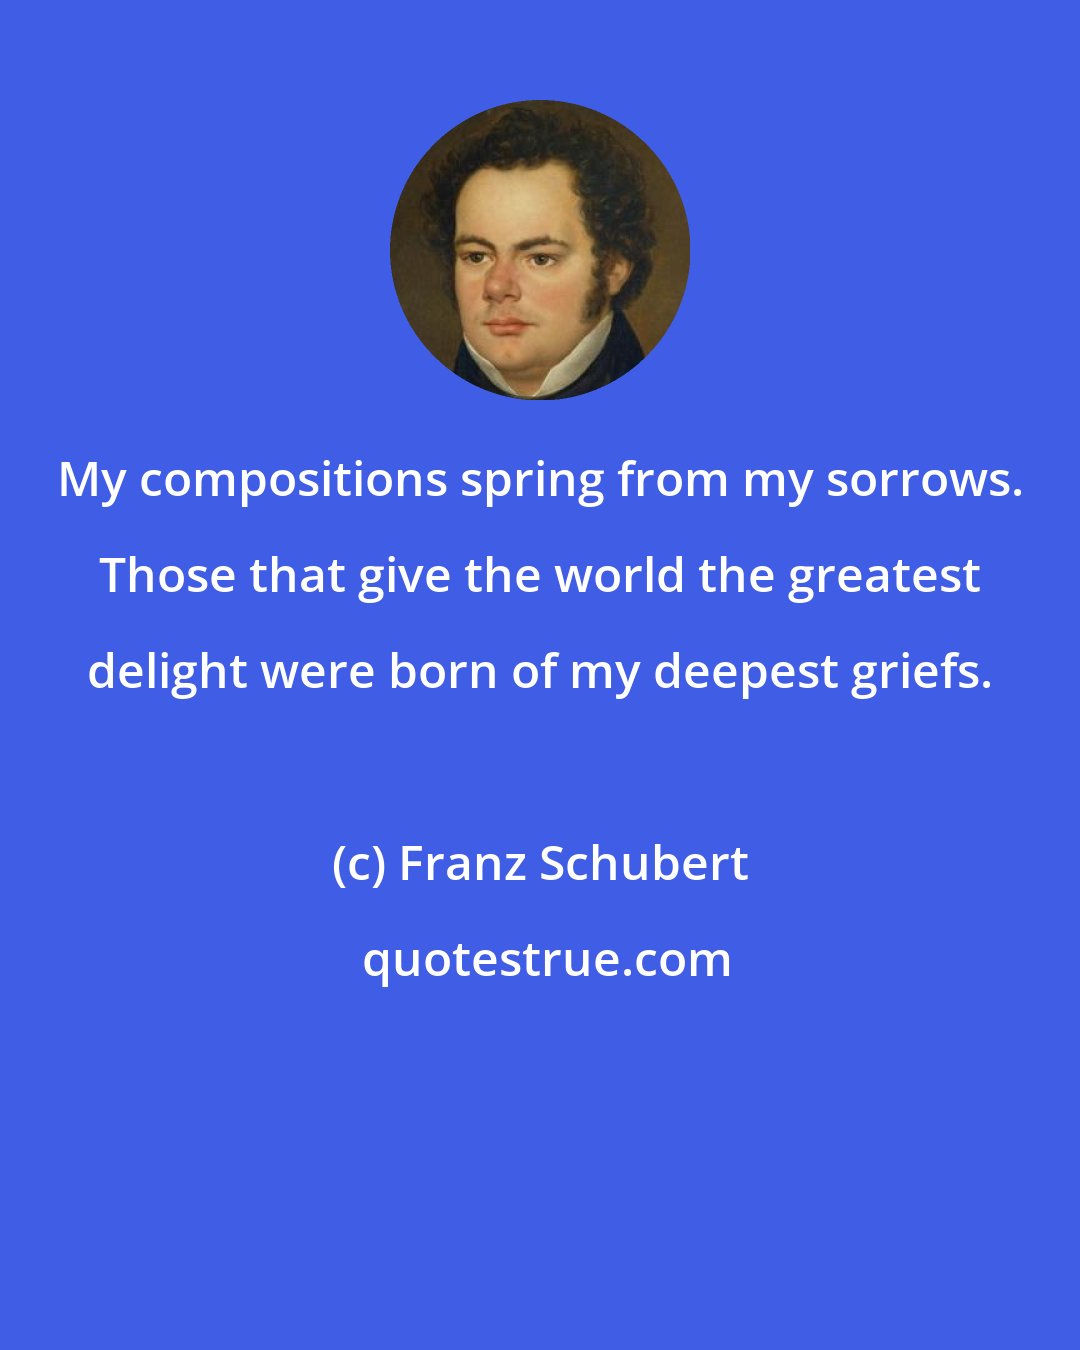 Franz Schubert: My compositions spring from my sorrows. Those that give the world the greatest delight were born of my deepest griefs.